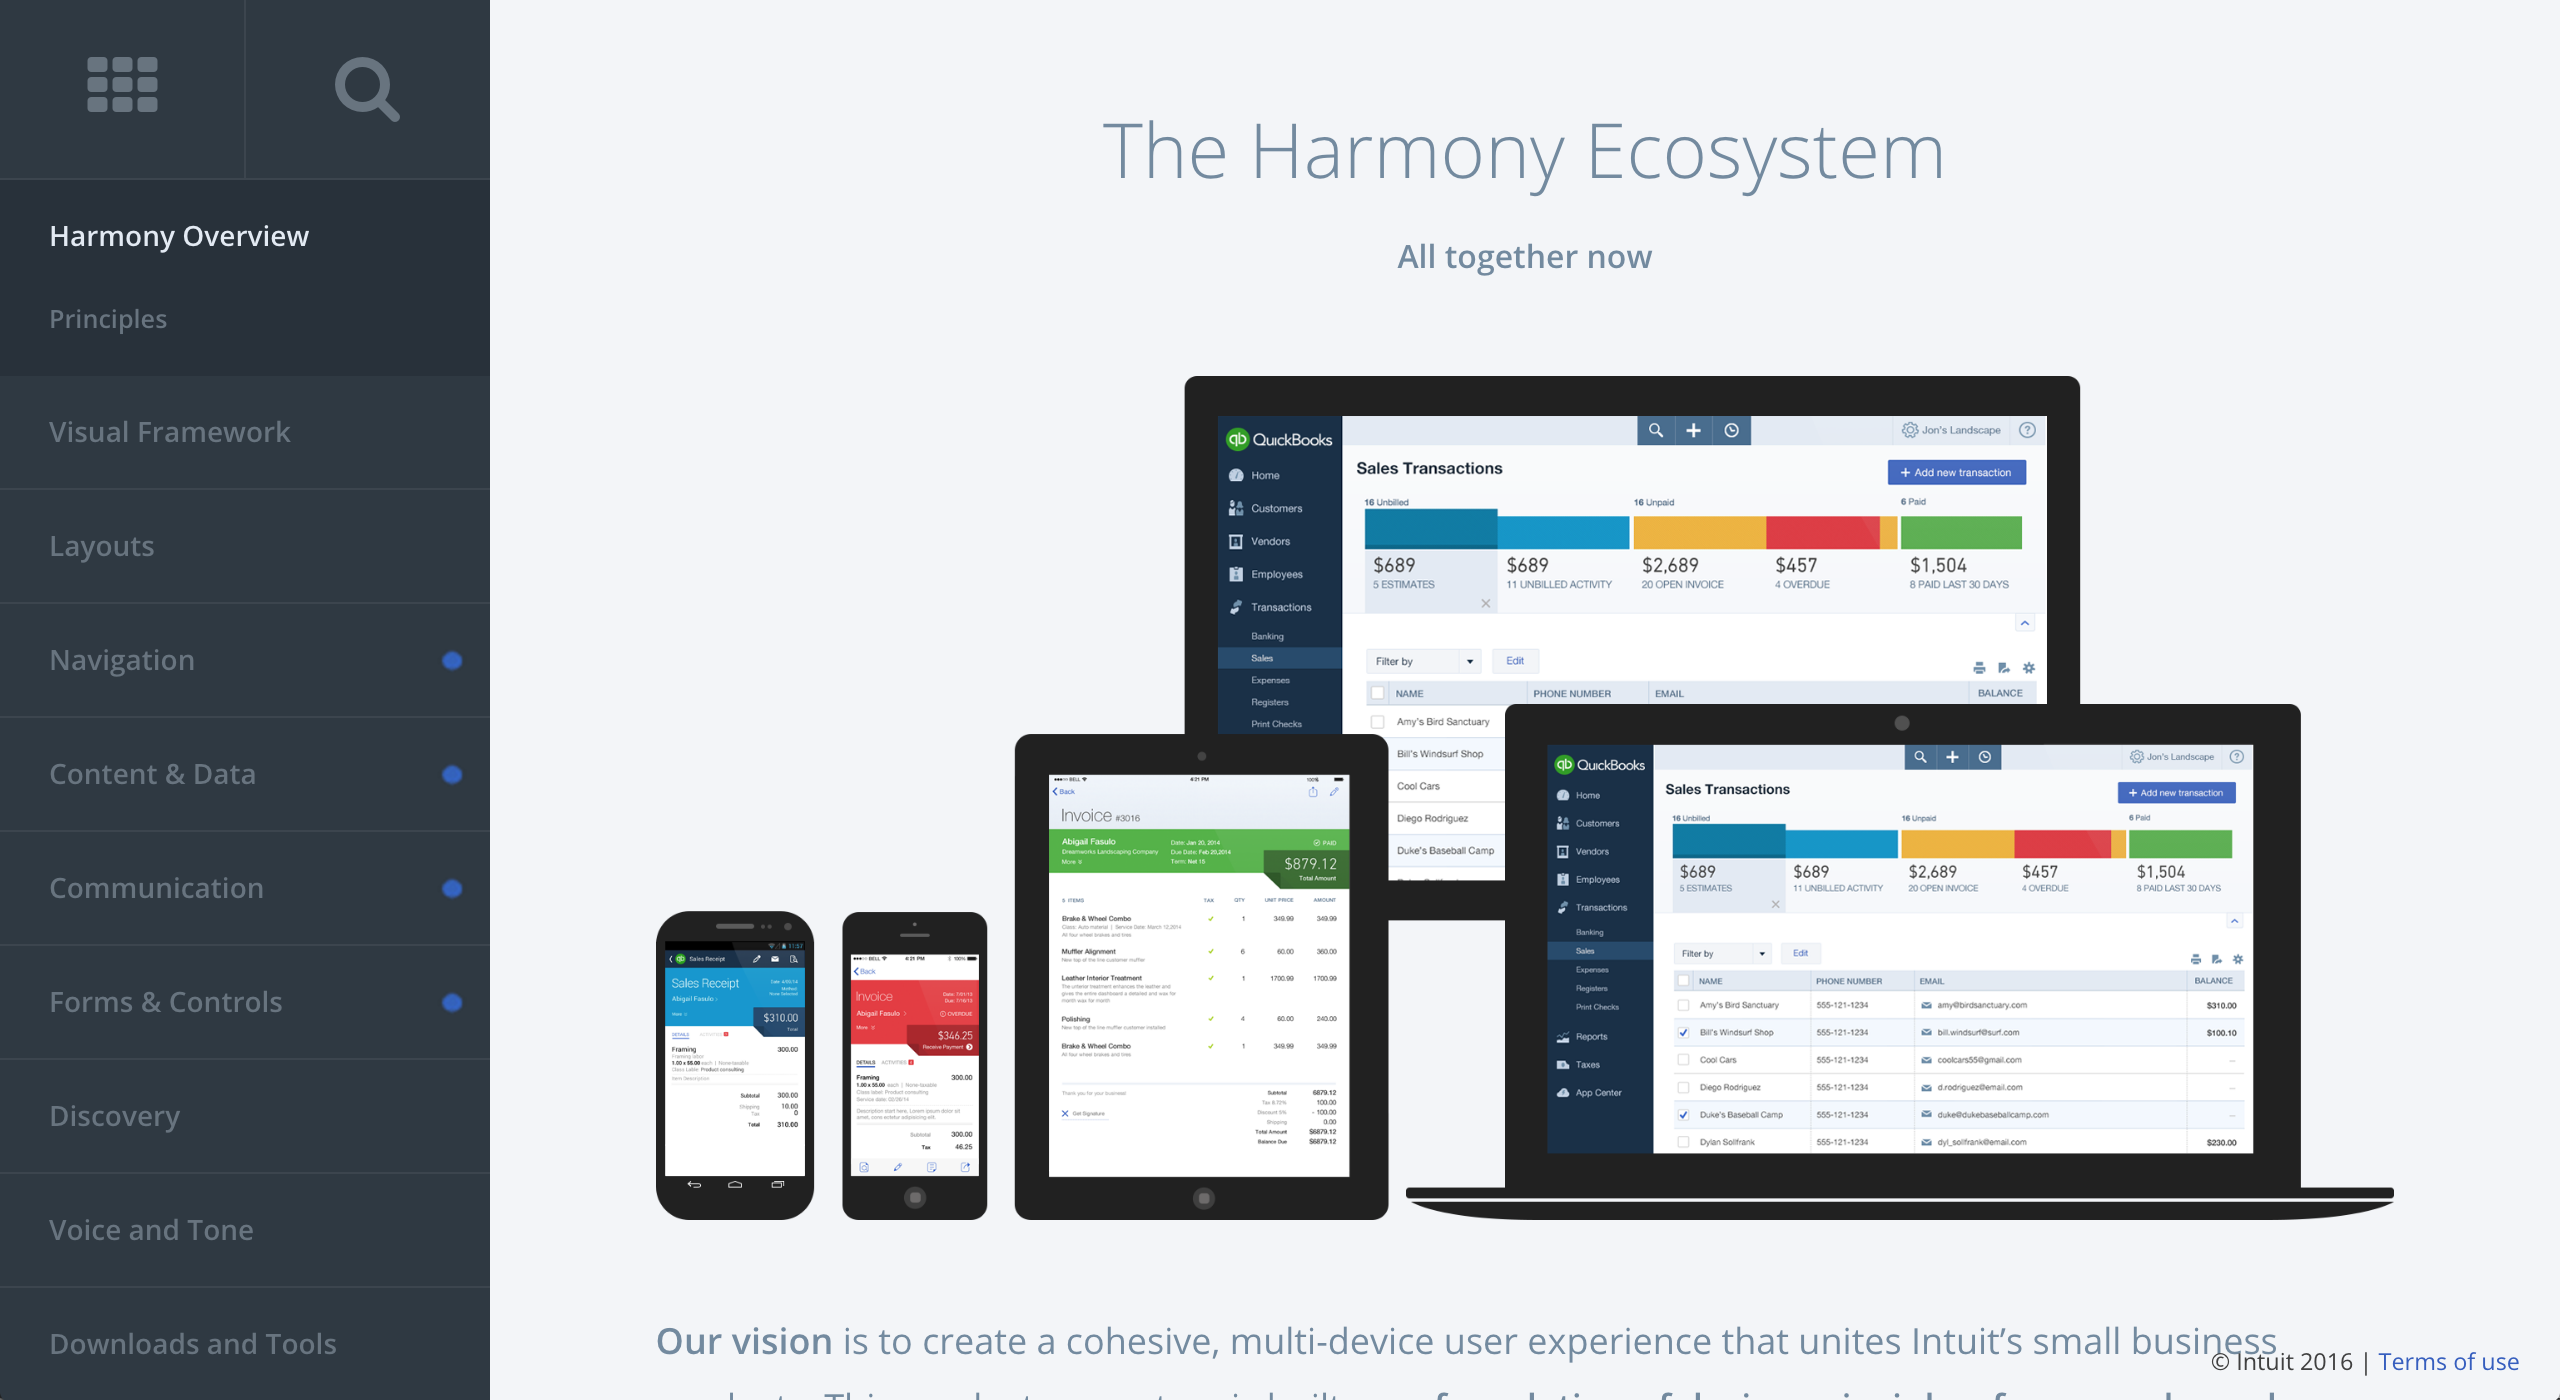 Intuit's Harmony design system includes a pattern library, design principles, voice and tone, marketing guidelines, and more. Housing this helpful documentation under one roof helps increase its visibility and effectiveness.